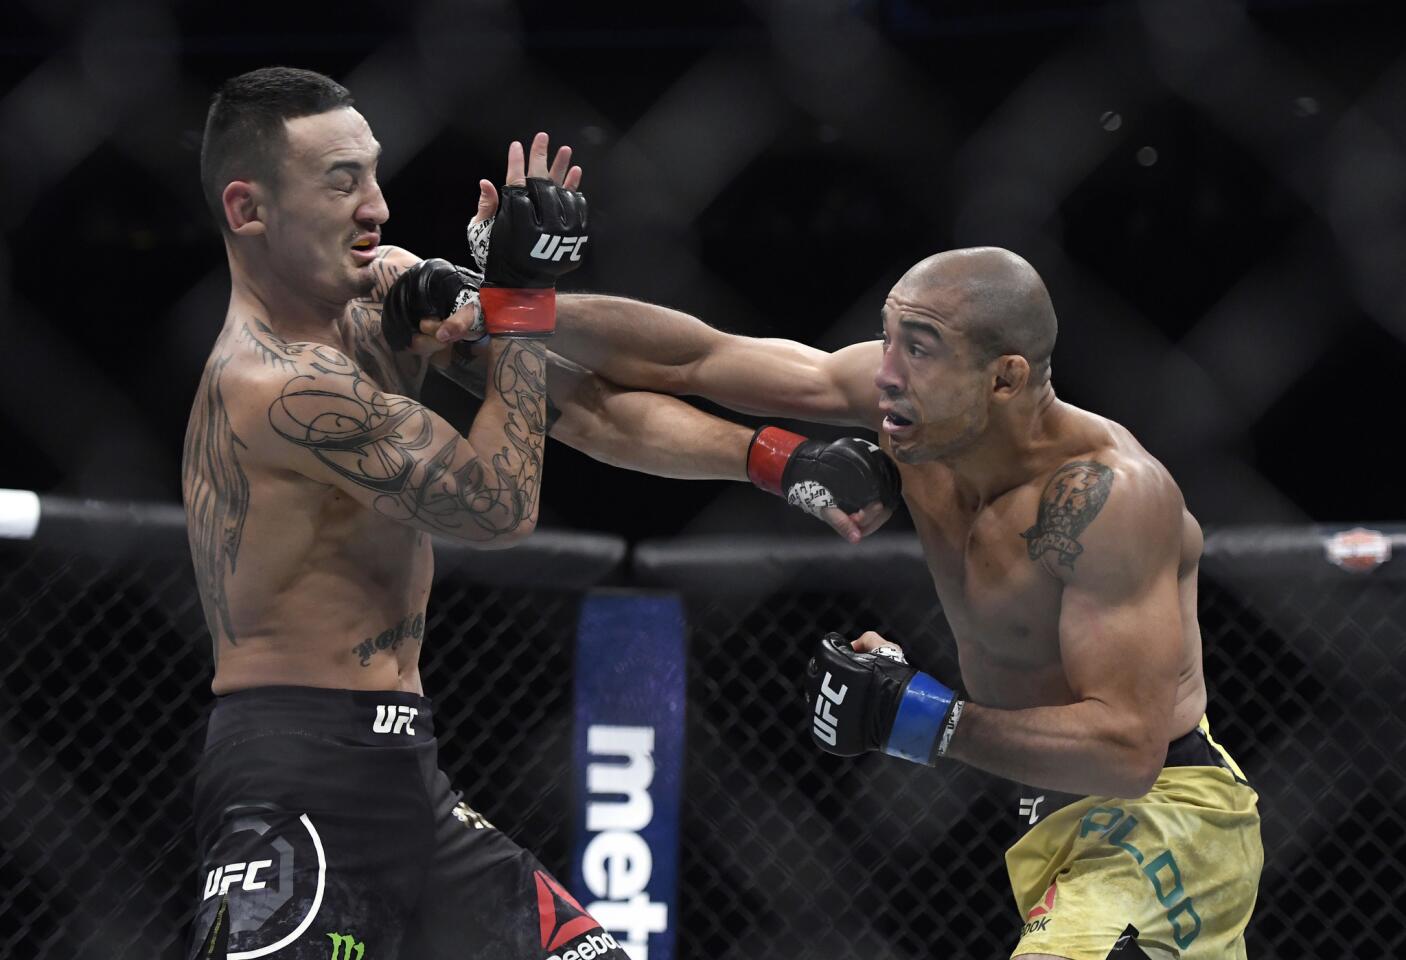 Jose Aldo lands an overhand right against Max Holloway during the first round of their featherweight title fight at UFC 218.